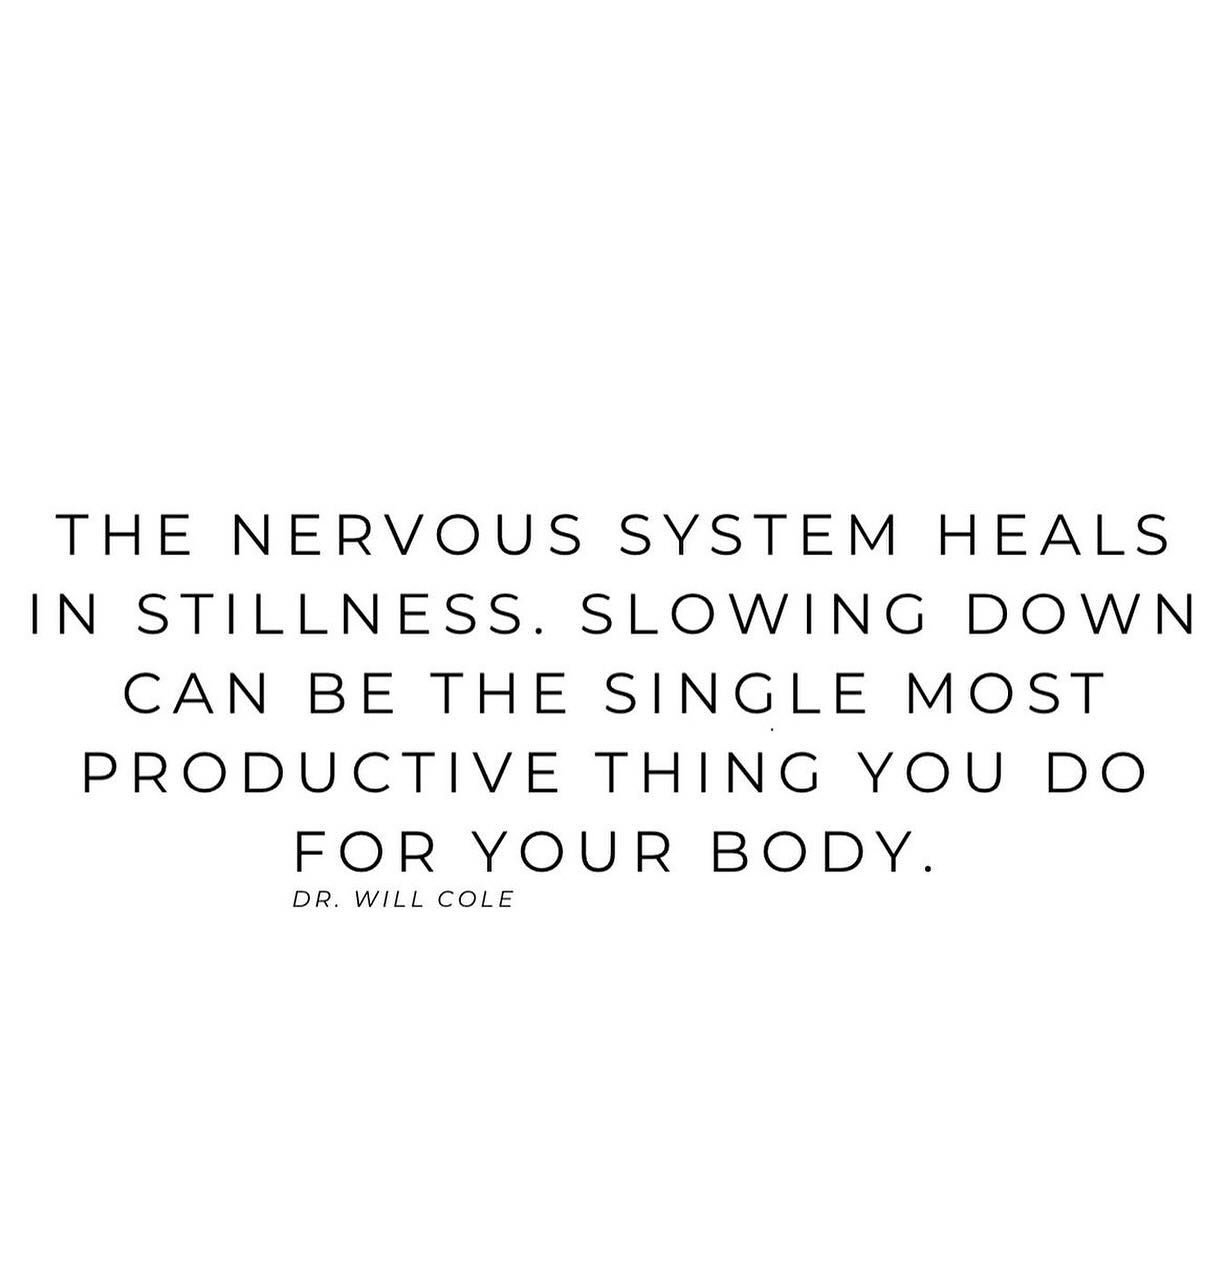 What&rsquo;s your favorite way to slow down and give yourself the rest you deserve? ☺️

.
#nervoussystemhealing #slowdown #regulateyournervoussystem #mentalhealthtips #selfcaretips #bestill #goalmindset #growthmindset  #starttoday #believeinyourself 